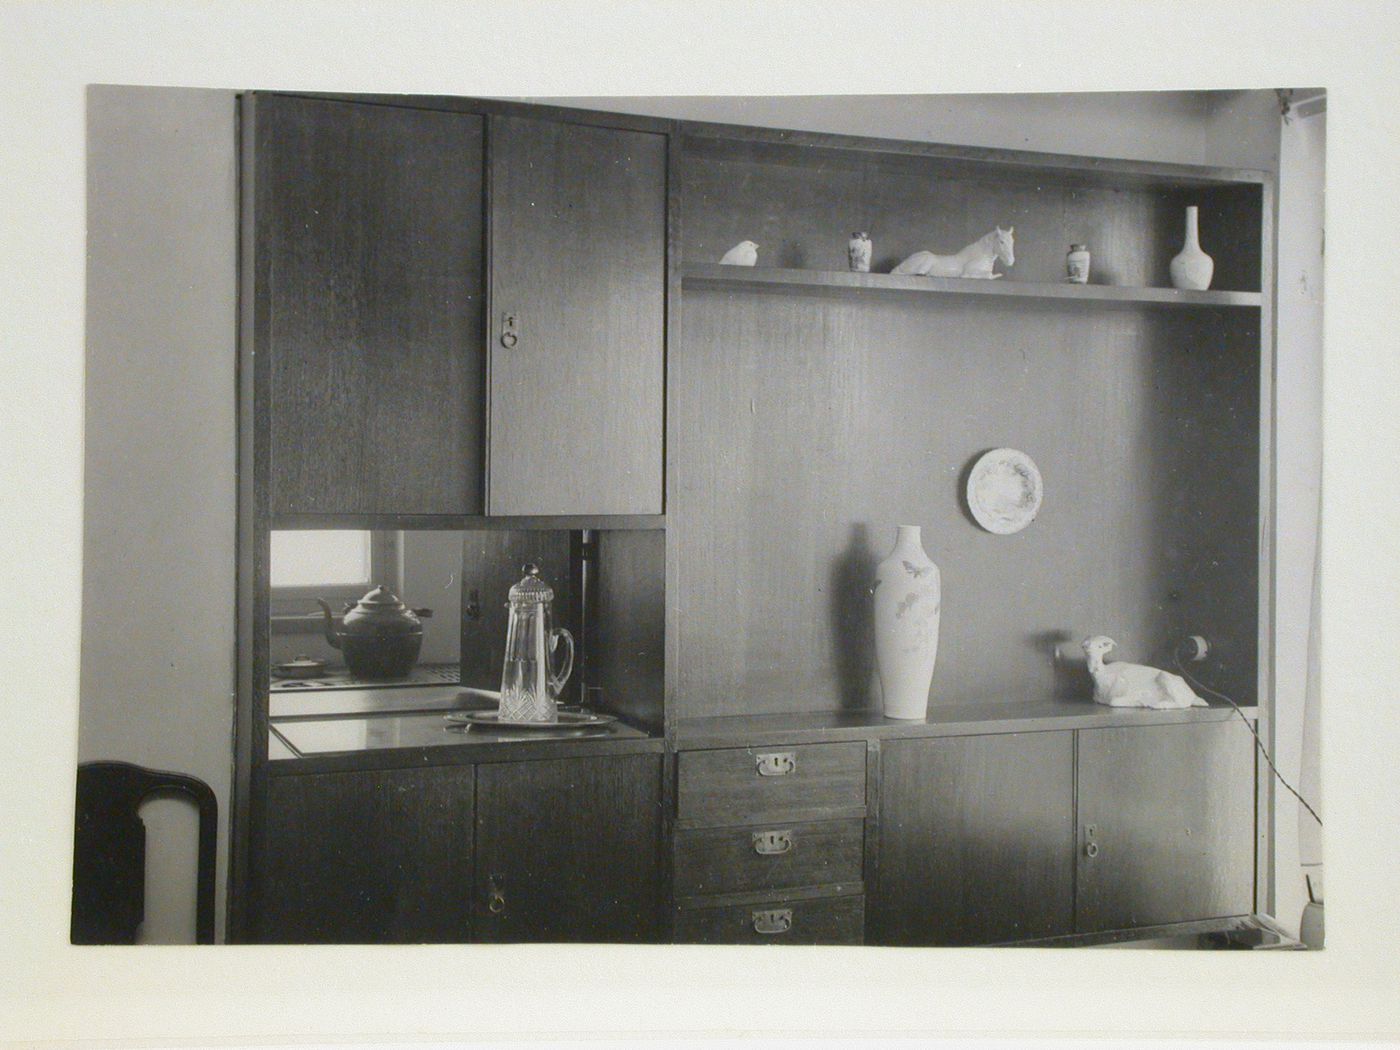 Interior view of Nikolai Milutin's apartment showing the built-in wall unit in the dining room [?] which opens onto the built-in kitchen, People's Commissariat for Finance (Narkomfin) Apartment Building, 25 Novinskii Boulevard, Moscow